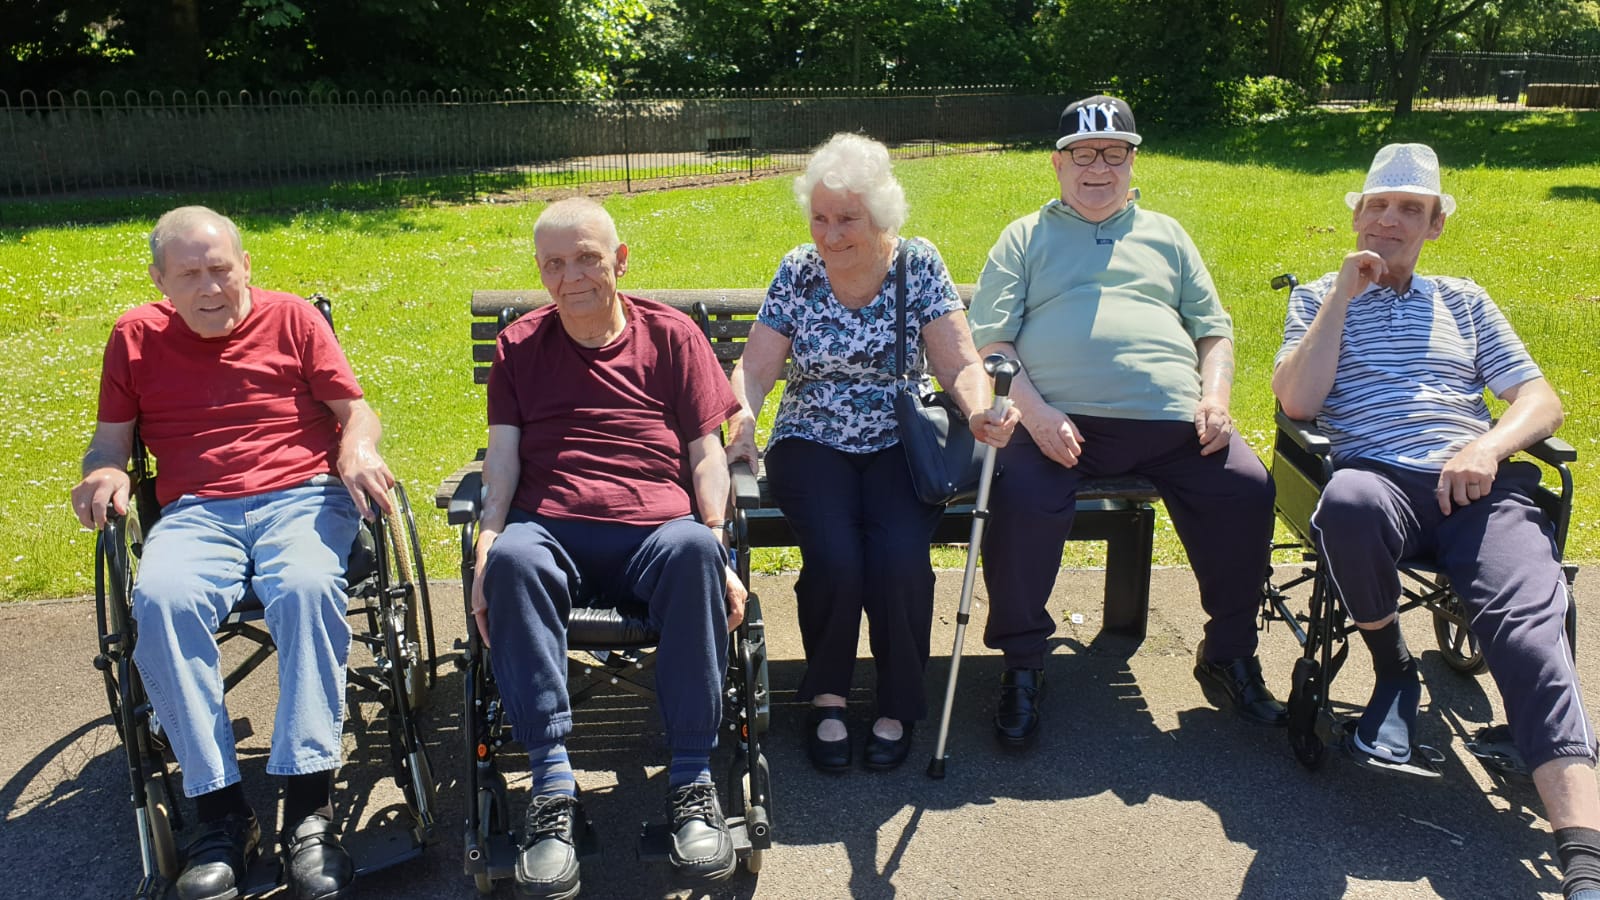 A walk in the park!: Key Healthcare is dedicated to caring for elderly residents in safe. We have multiple dementia care homes including our care home middlesbrough, our care home St. Helen and care home saltburn. We excel in monitoring and improving care levels.